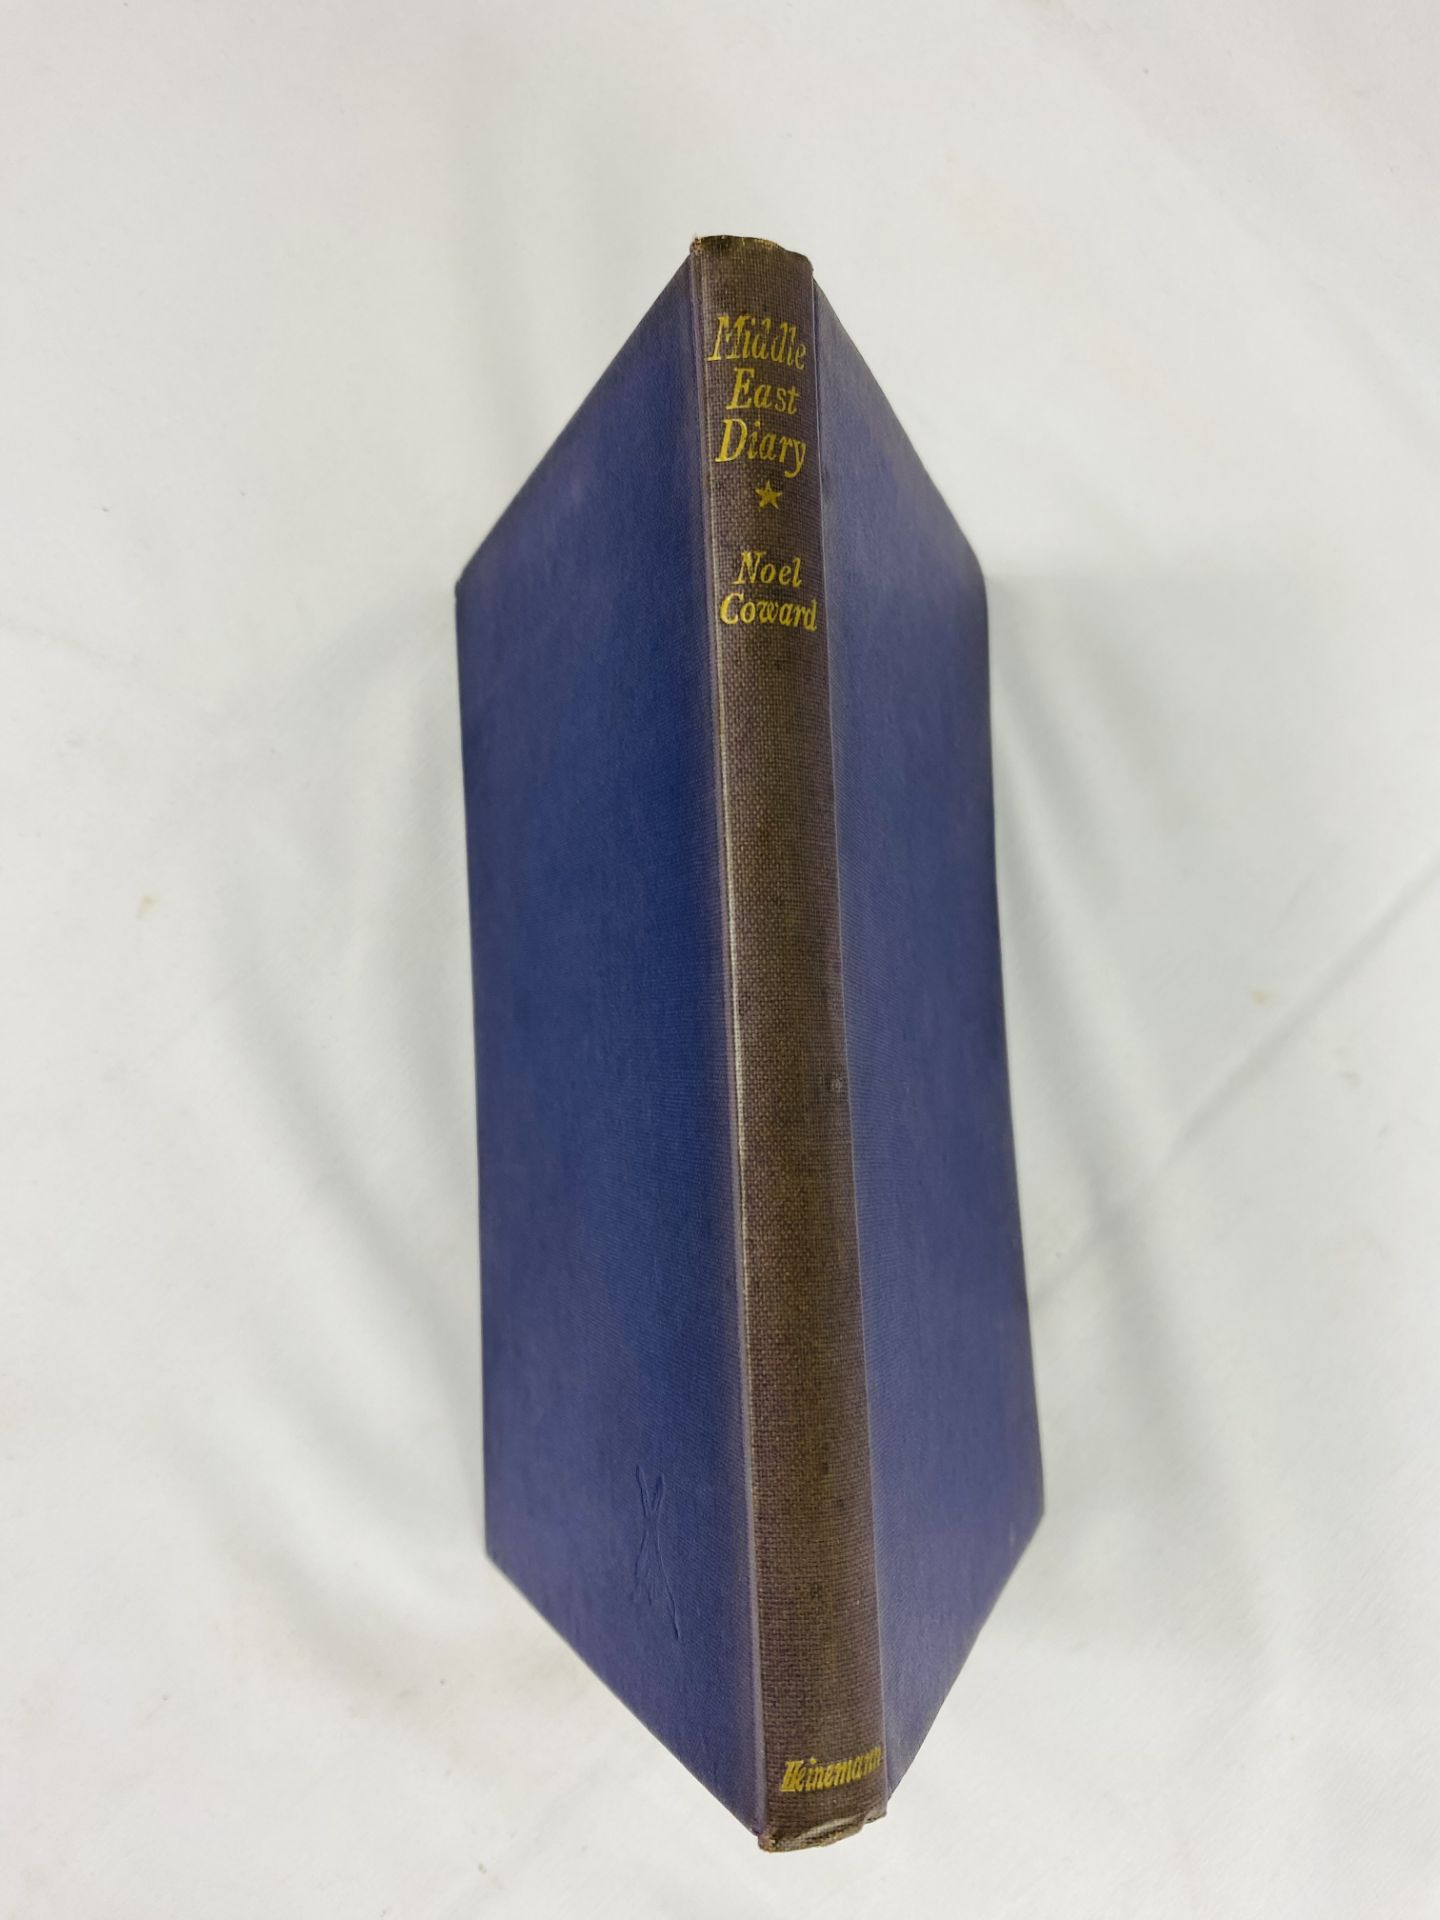 Noel Coward, Middle East Diary, first edition, William Heinemann Ltd, 1944 - Image 4 of 7